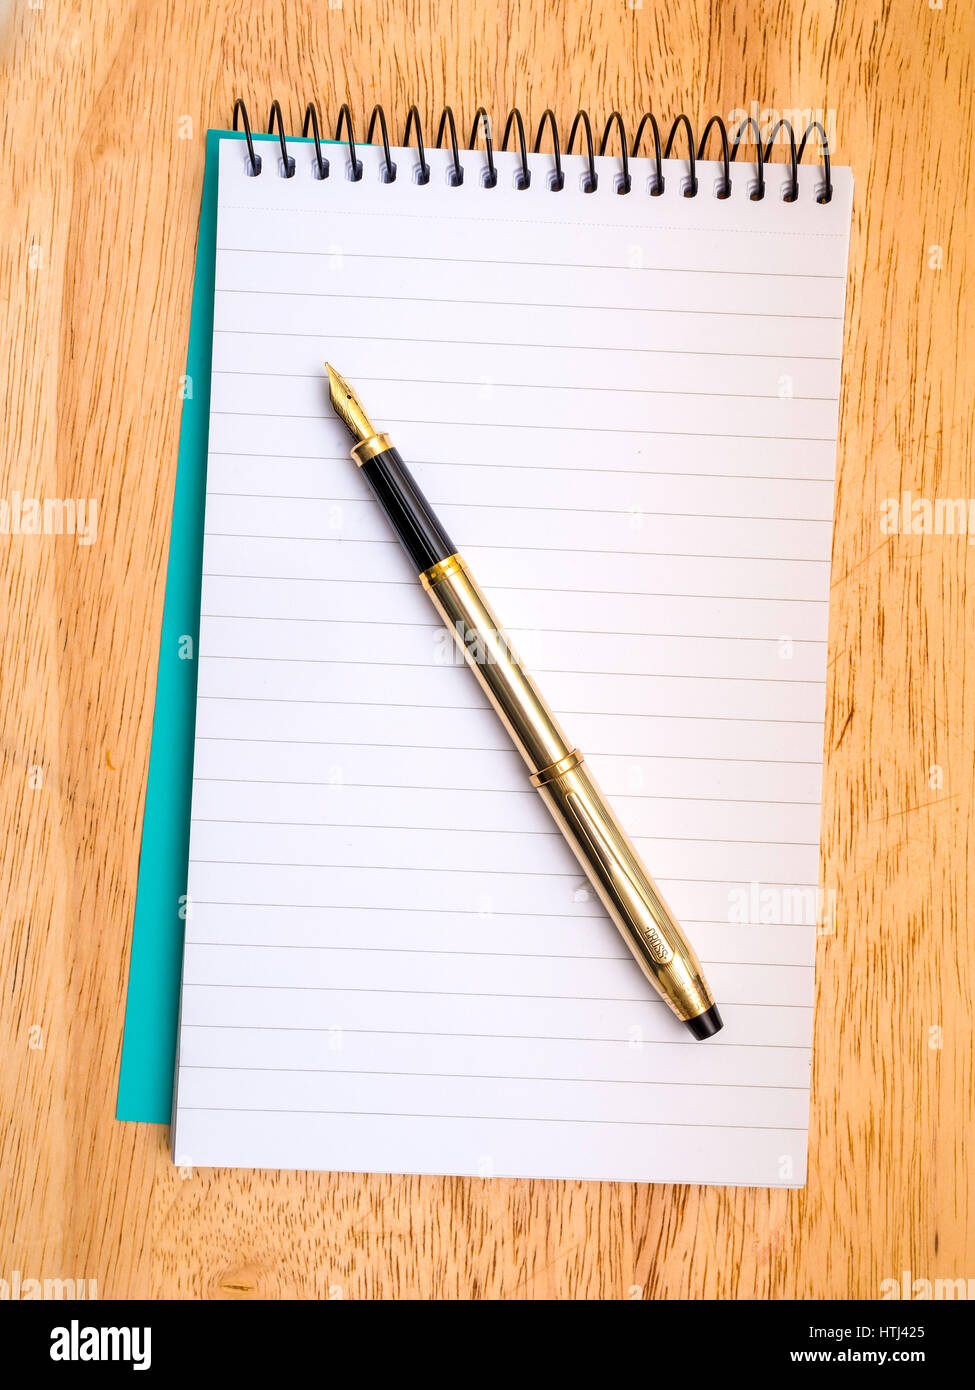 A Cross brand gold fountain pen resting on a spiral bound reporters notebook Stock Photo